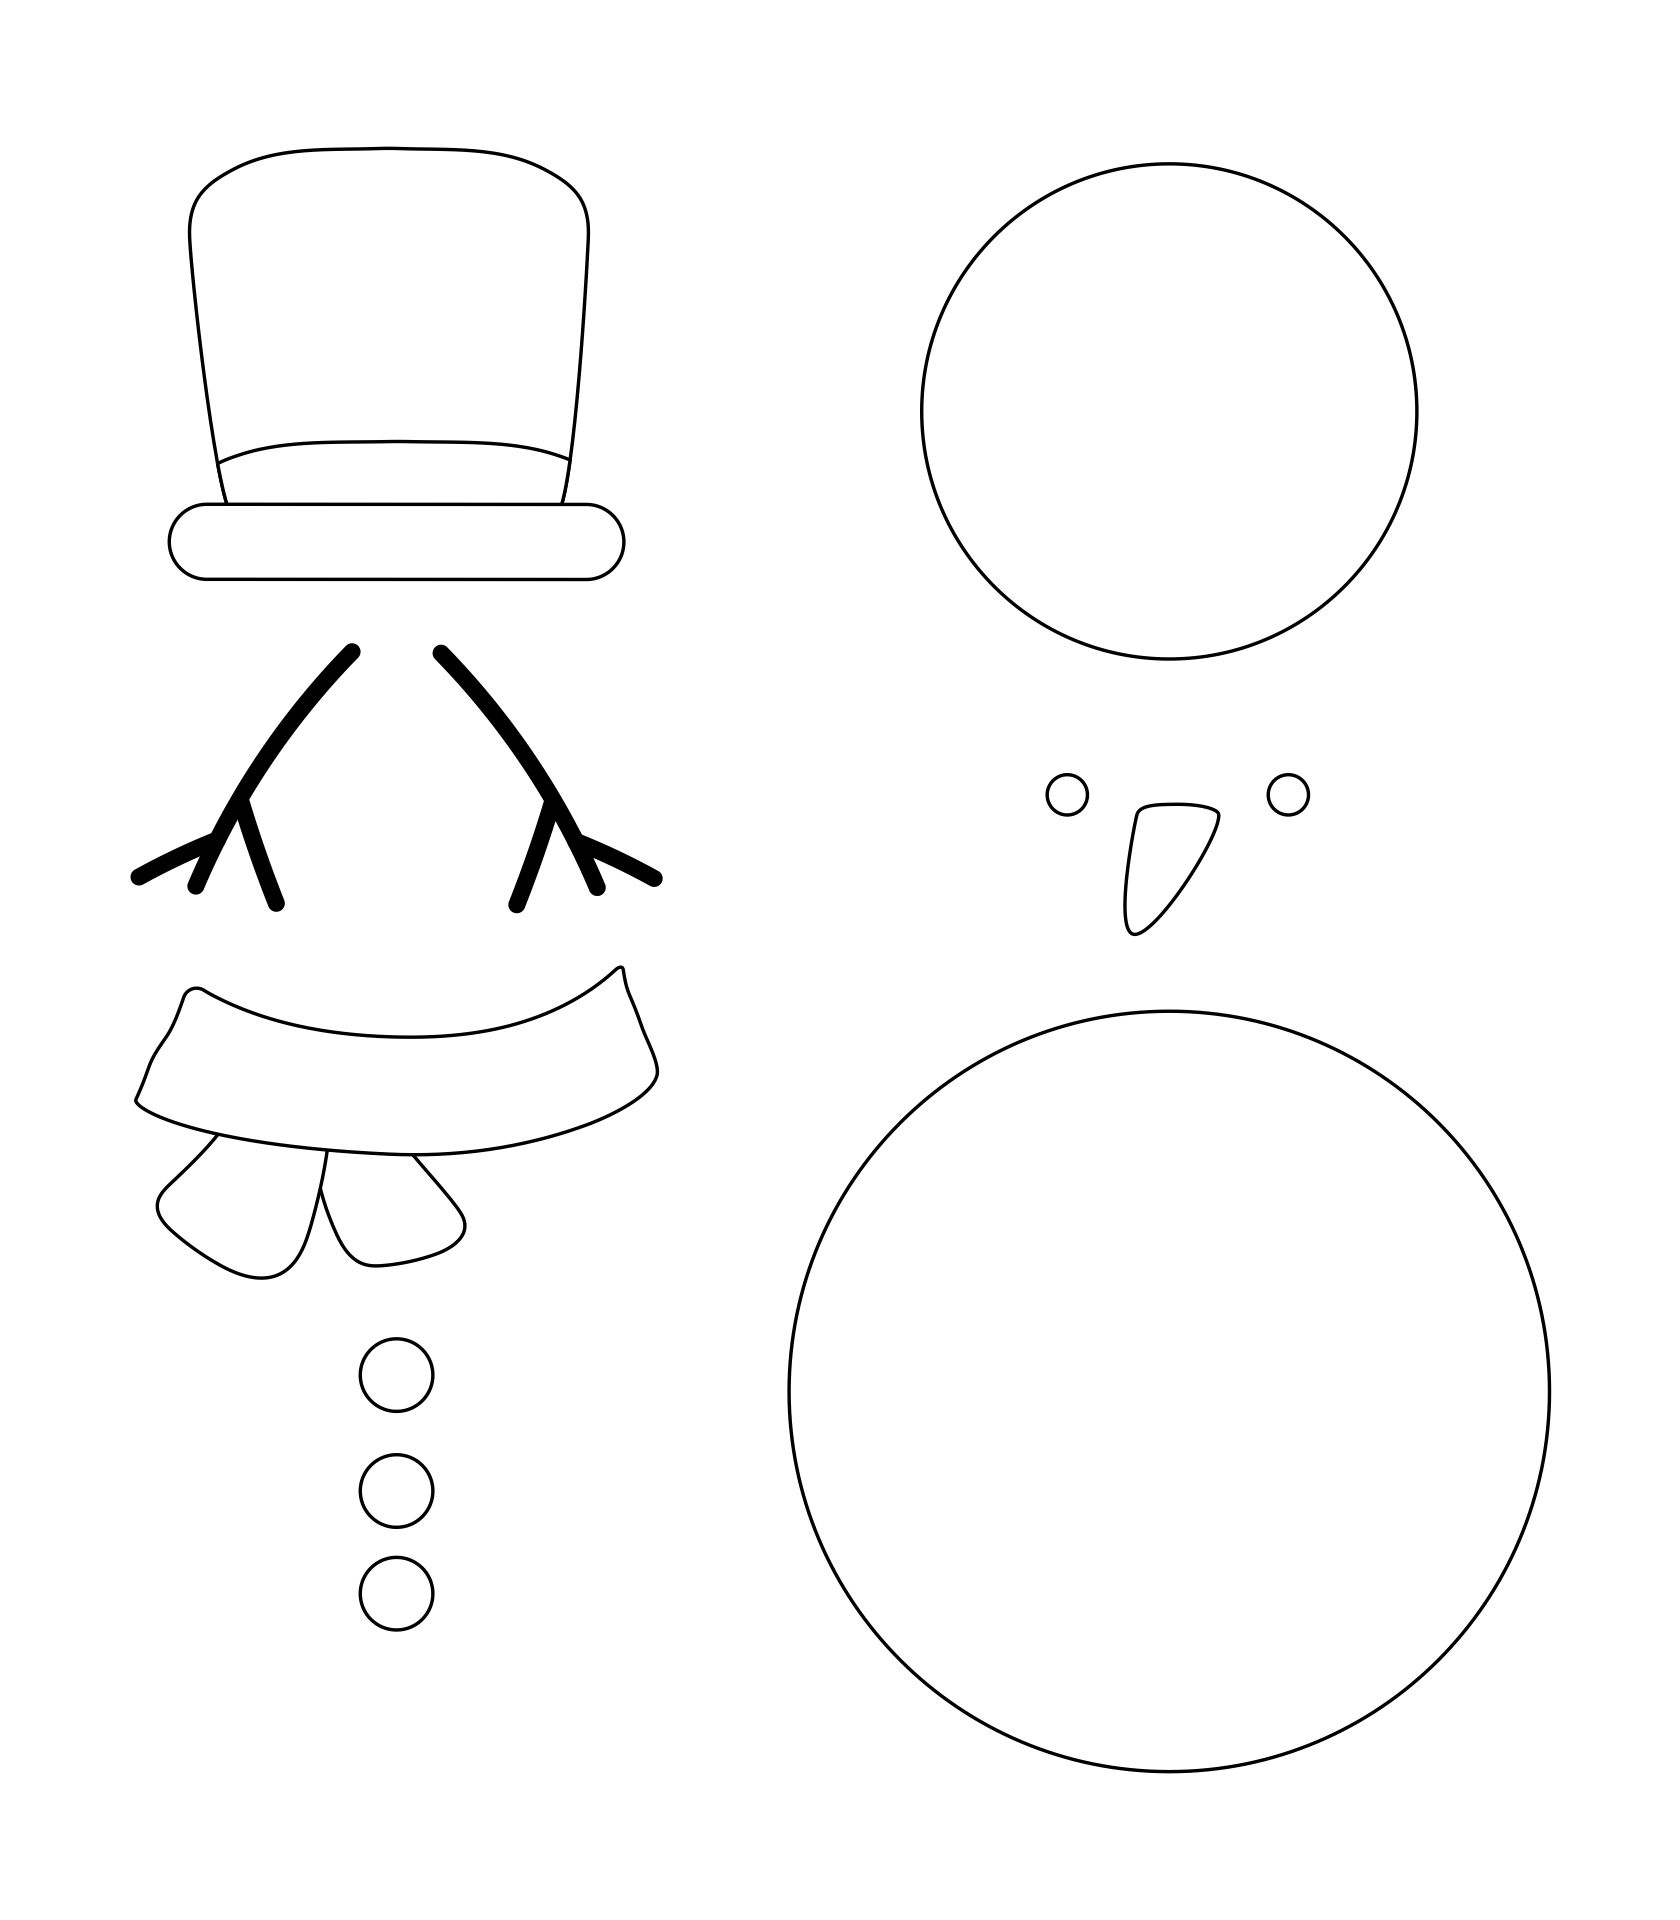 6 Best Images of Printable Snowman Cut Out Pattern Printable Snowman